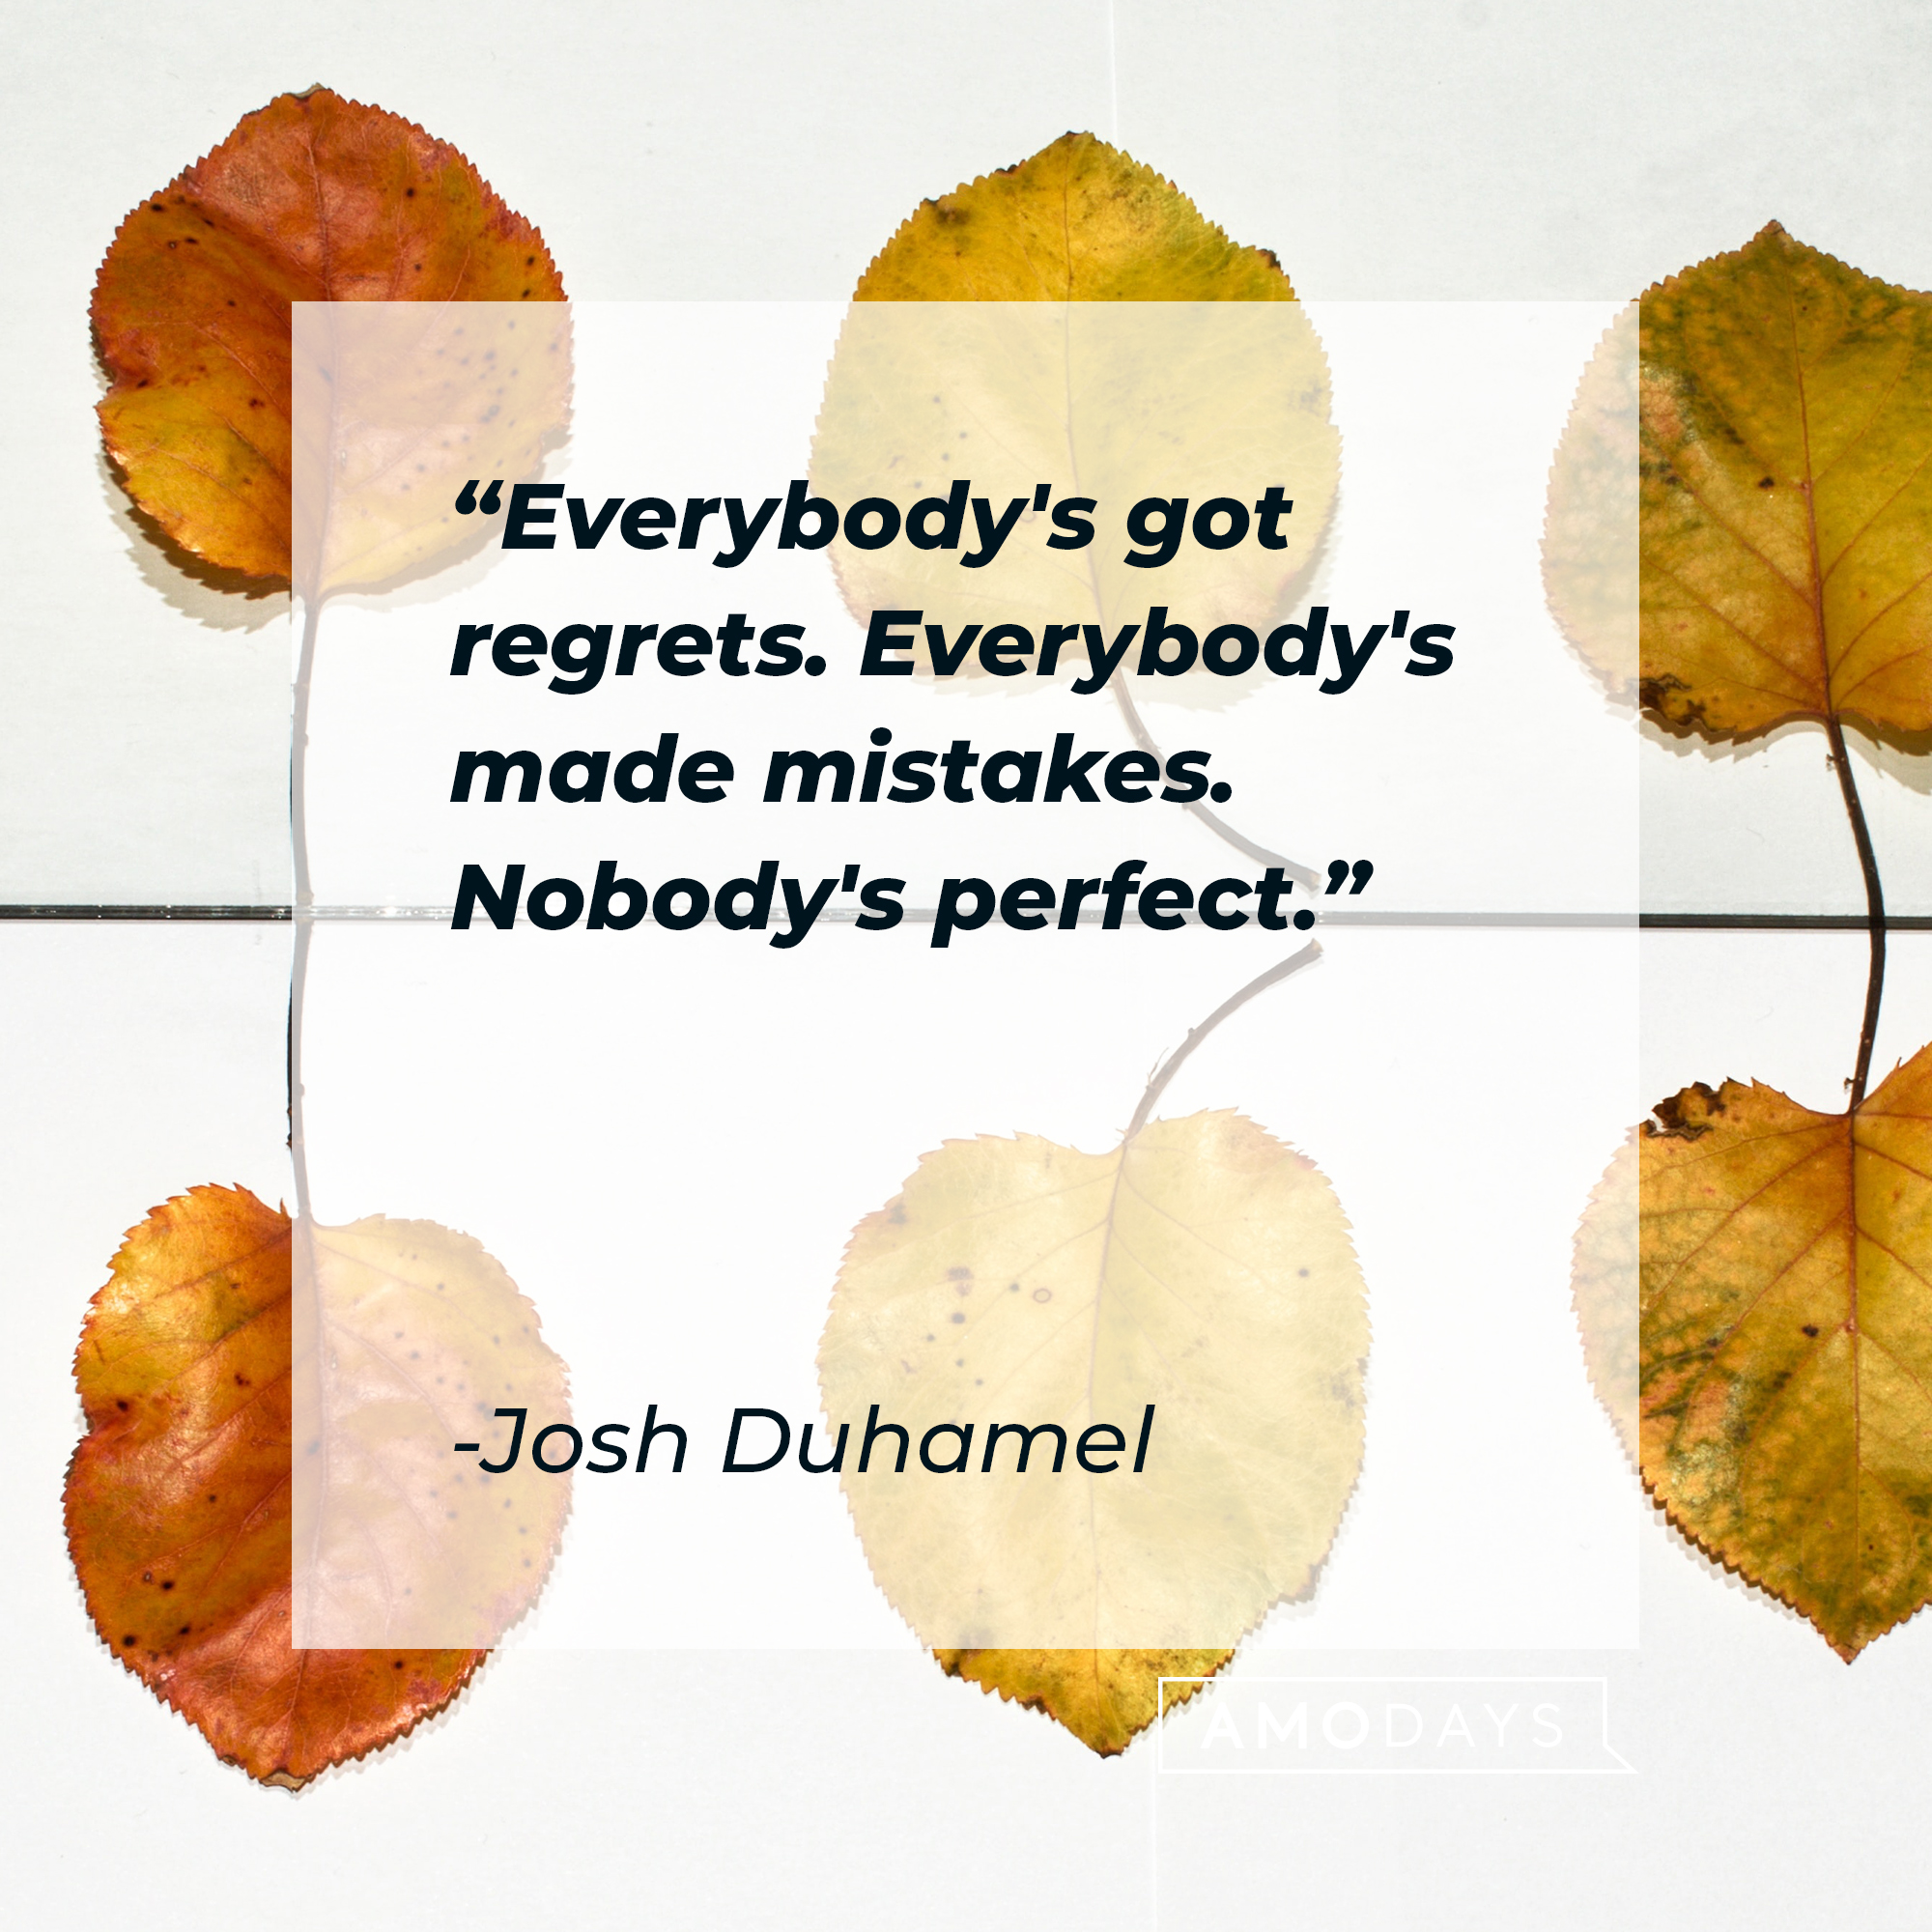 Josh Duhamel's quote: "Everybody's got regrets. Everybody's made mistakes. Nobody's perfect." | Image: Unsplash